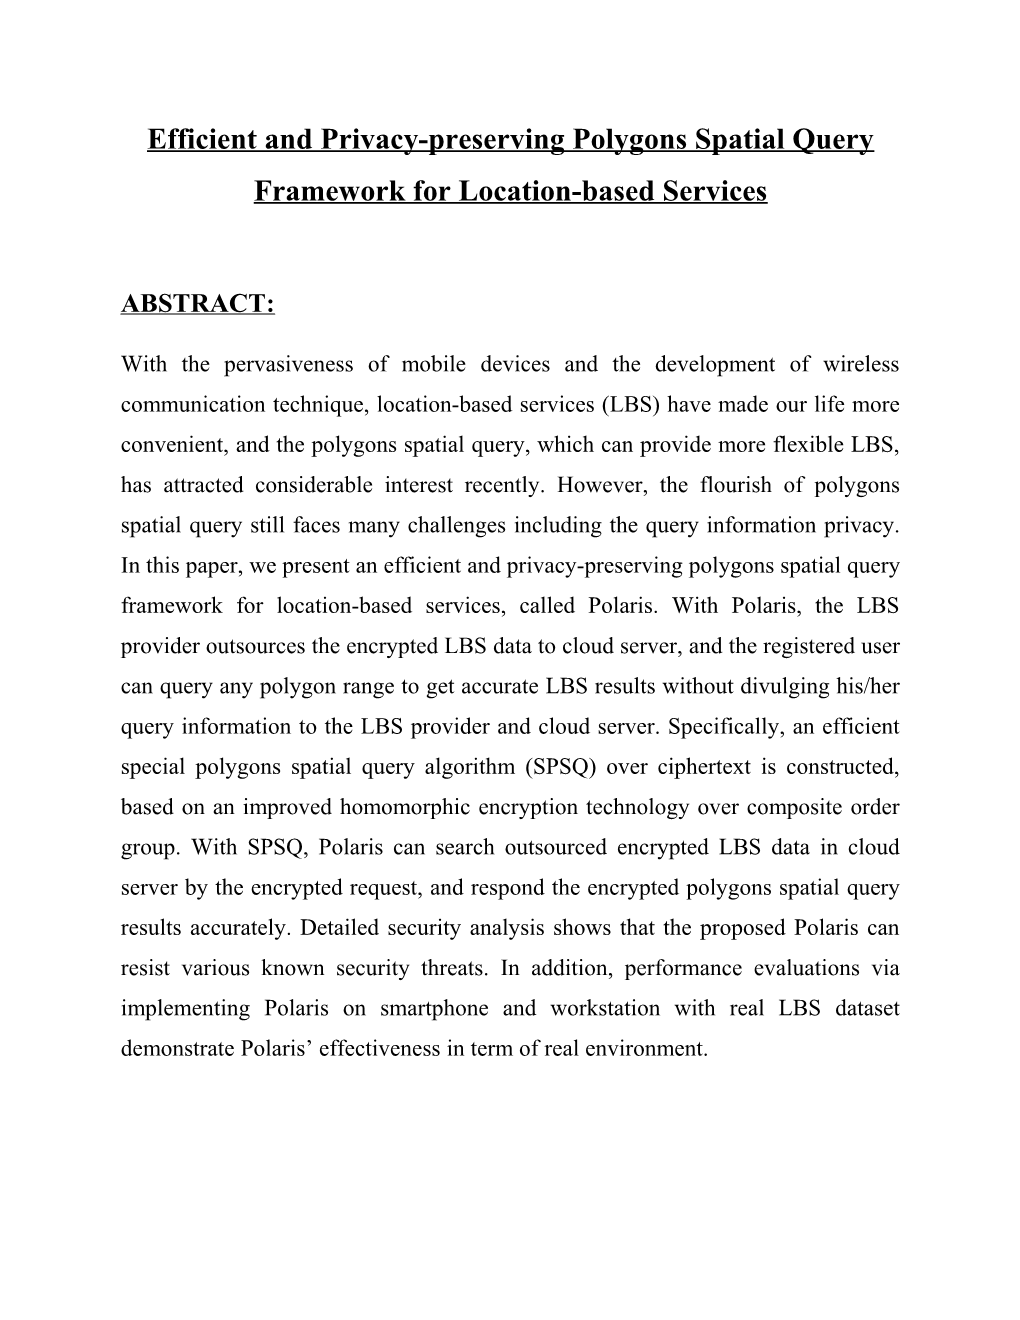 Efficient and Privacy-Preserving Polygons Spatialquery Framework for Location-Based Services